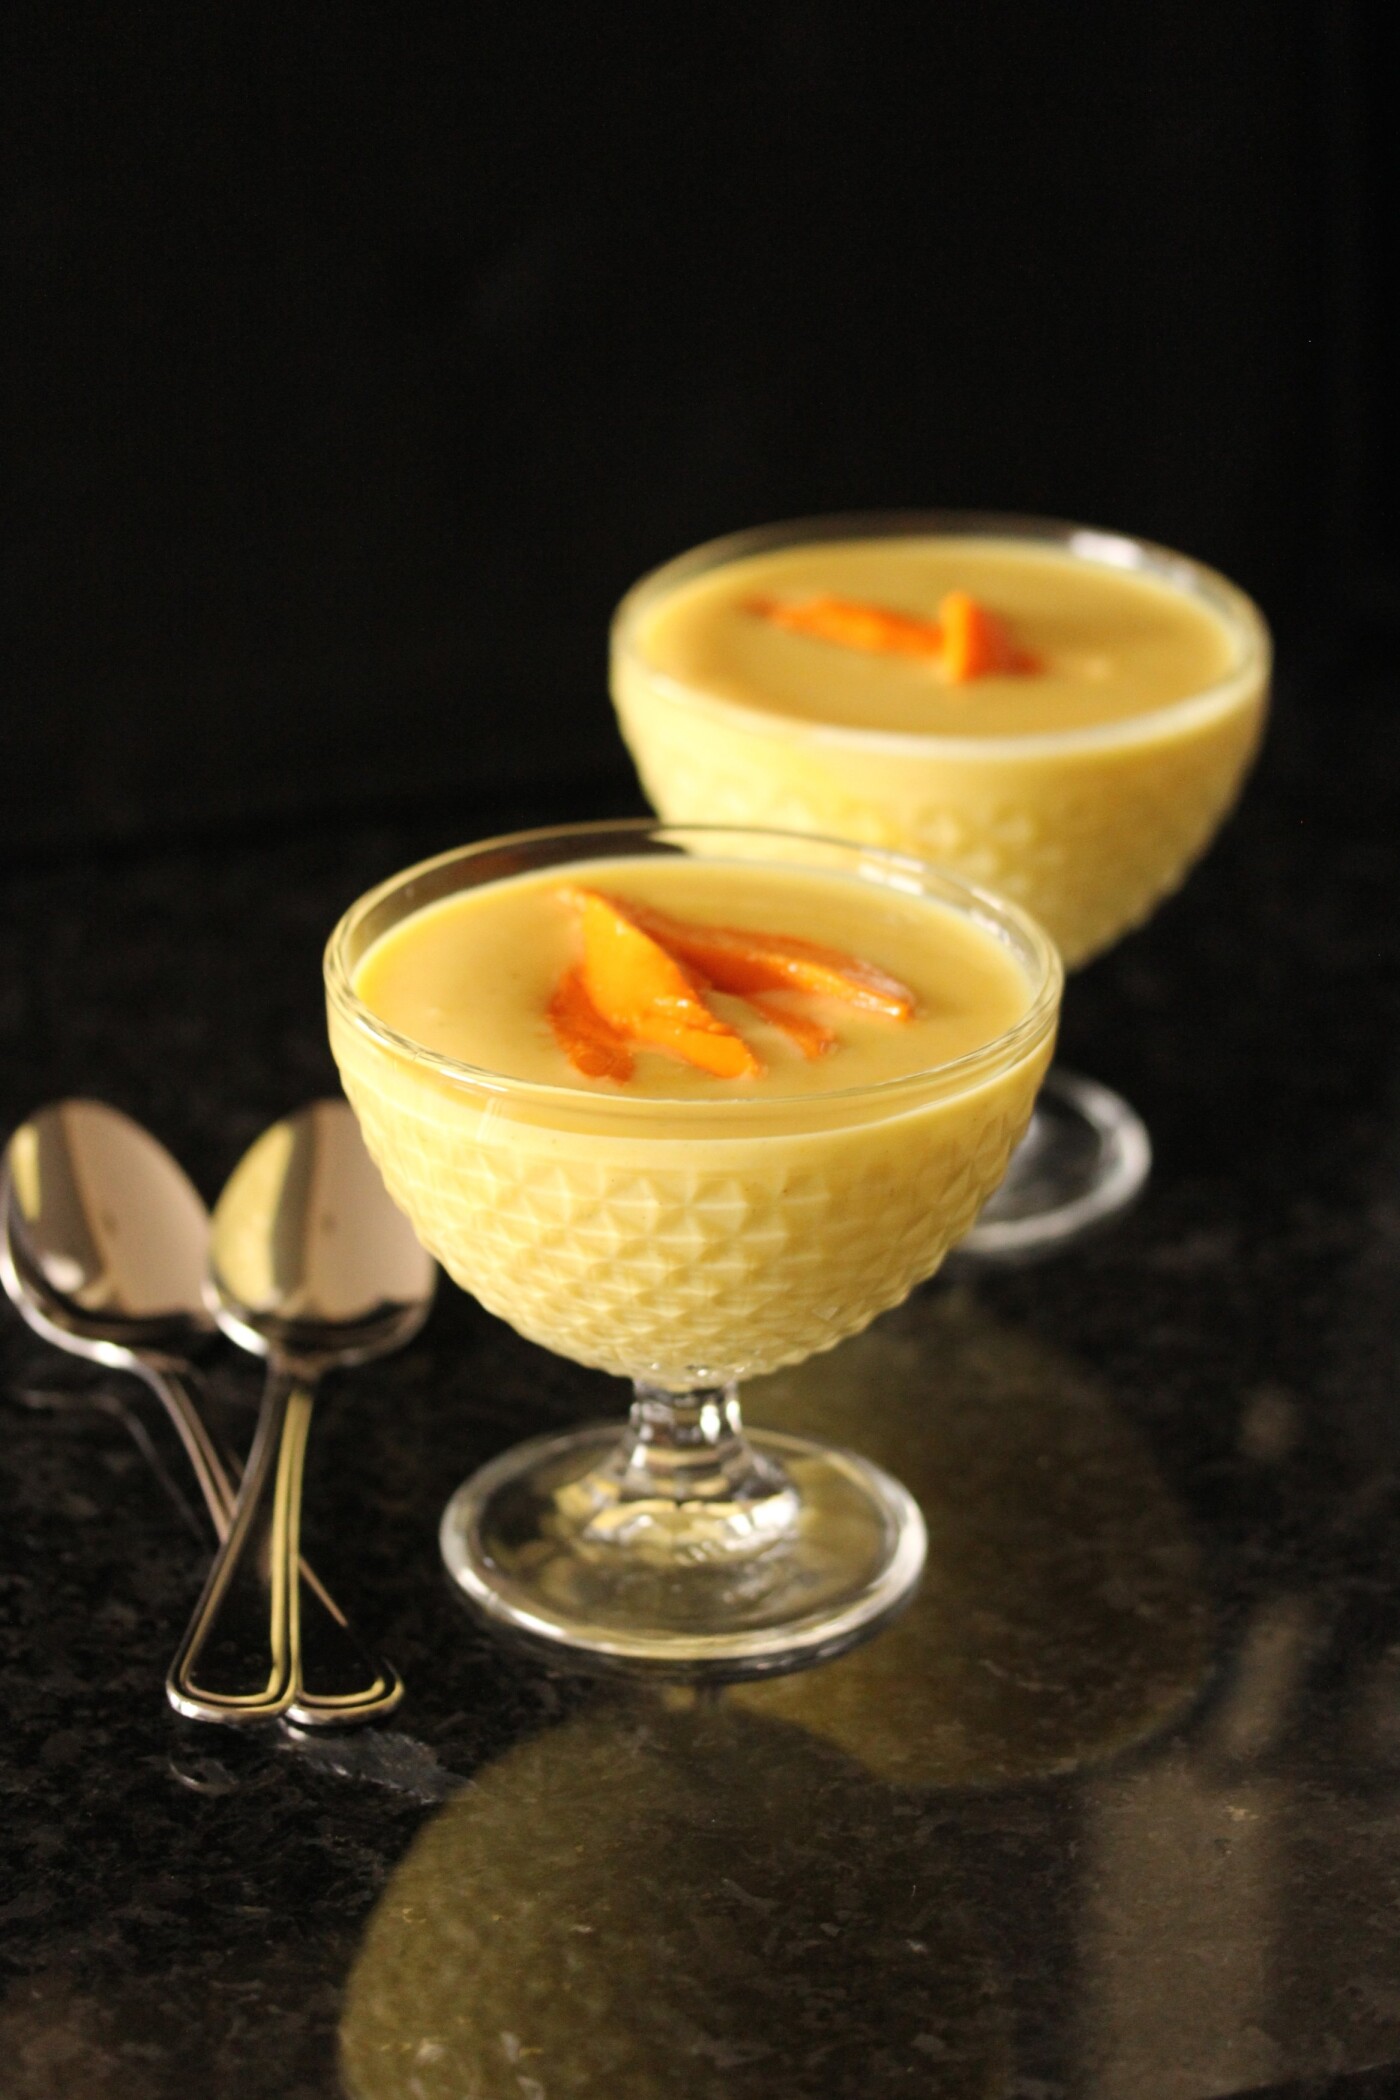 In this picture is my first attempt at making Phirni. A North Indian dessert prepared with milk, sugar, almonds, and powdered rice, and delicately flavored with cardamom and saffron.